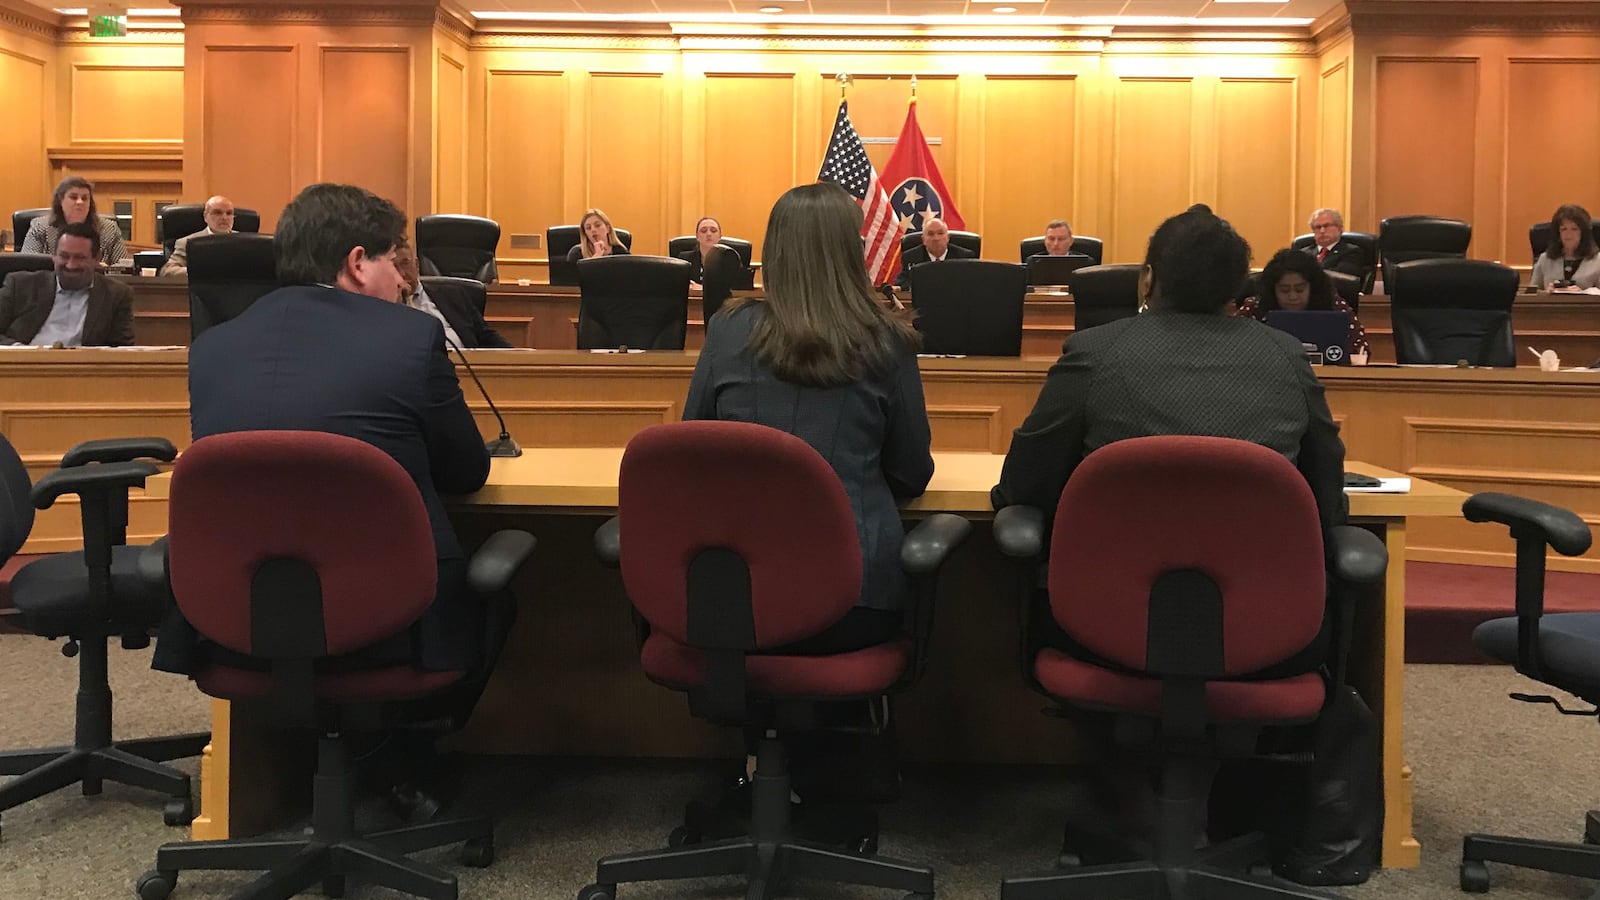 Education Commissioner Candice McQueen (center) testifies before Tennessee lawmakers along with Questar CEO Stephen Lazer and Assistant Education Commissioner Nakia Towns.